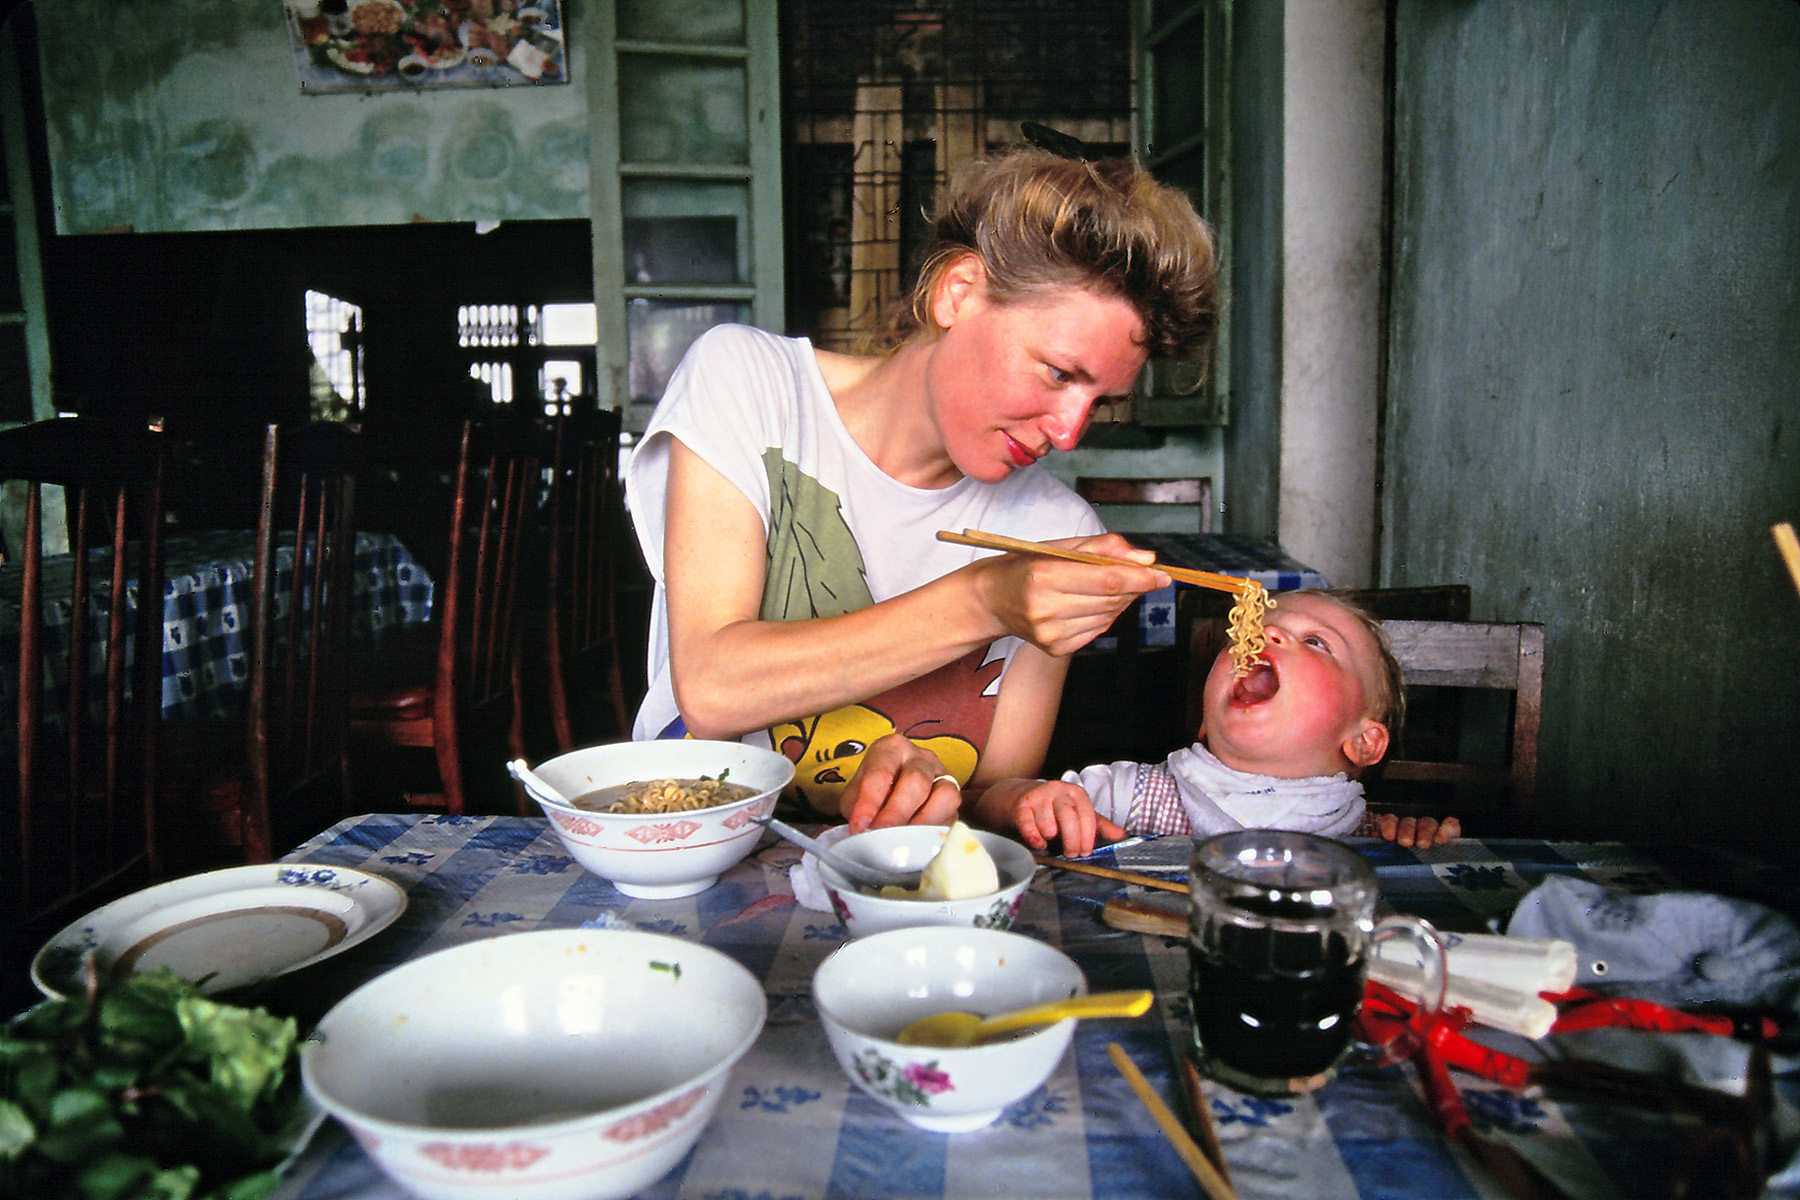 Mother bird-feeding her two year old son some noodles with chopsticks.